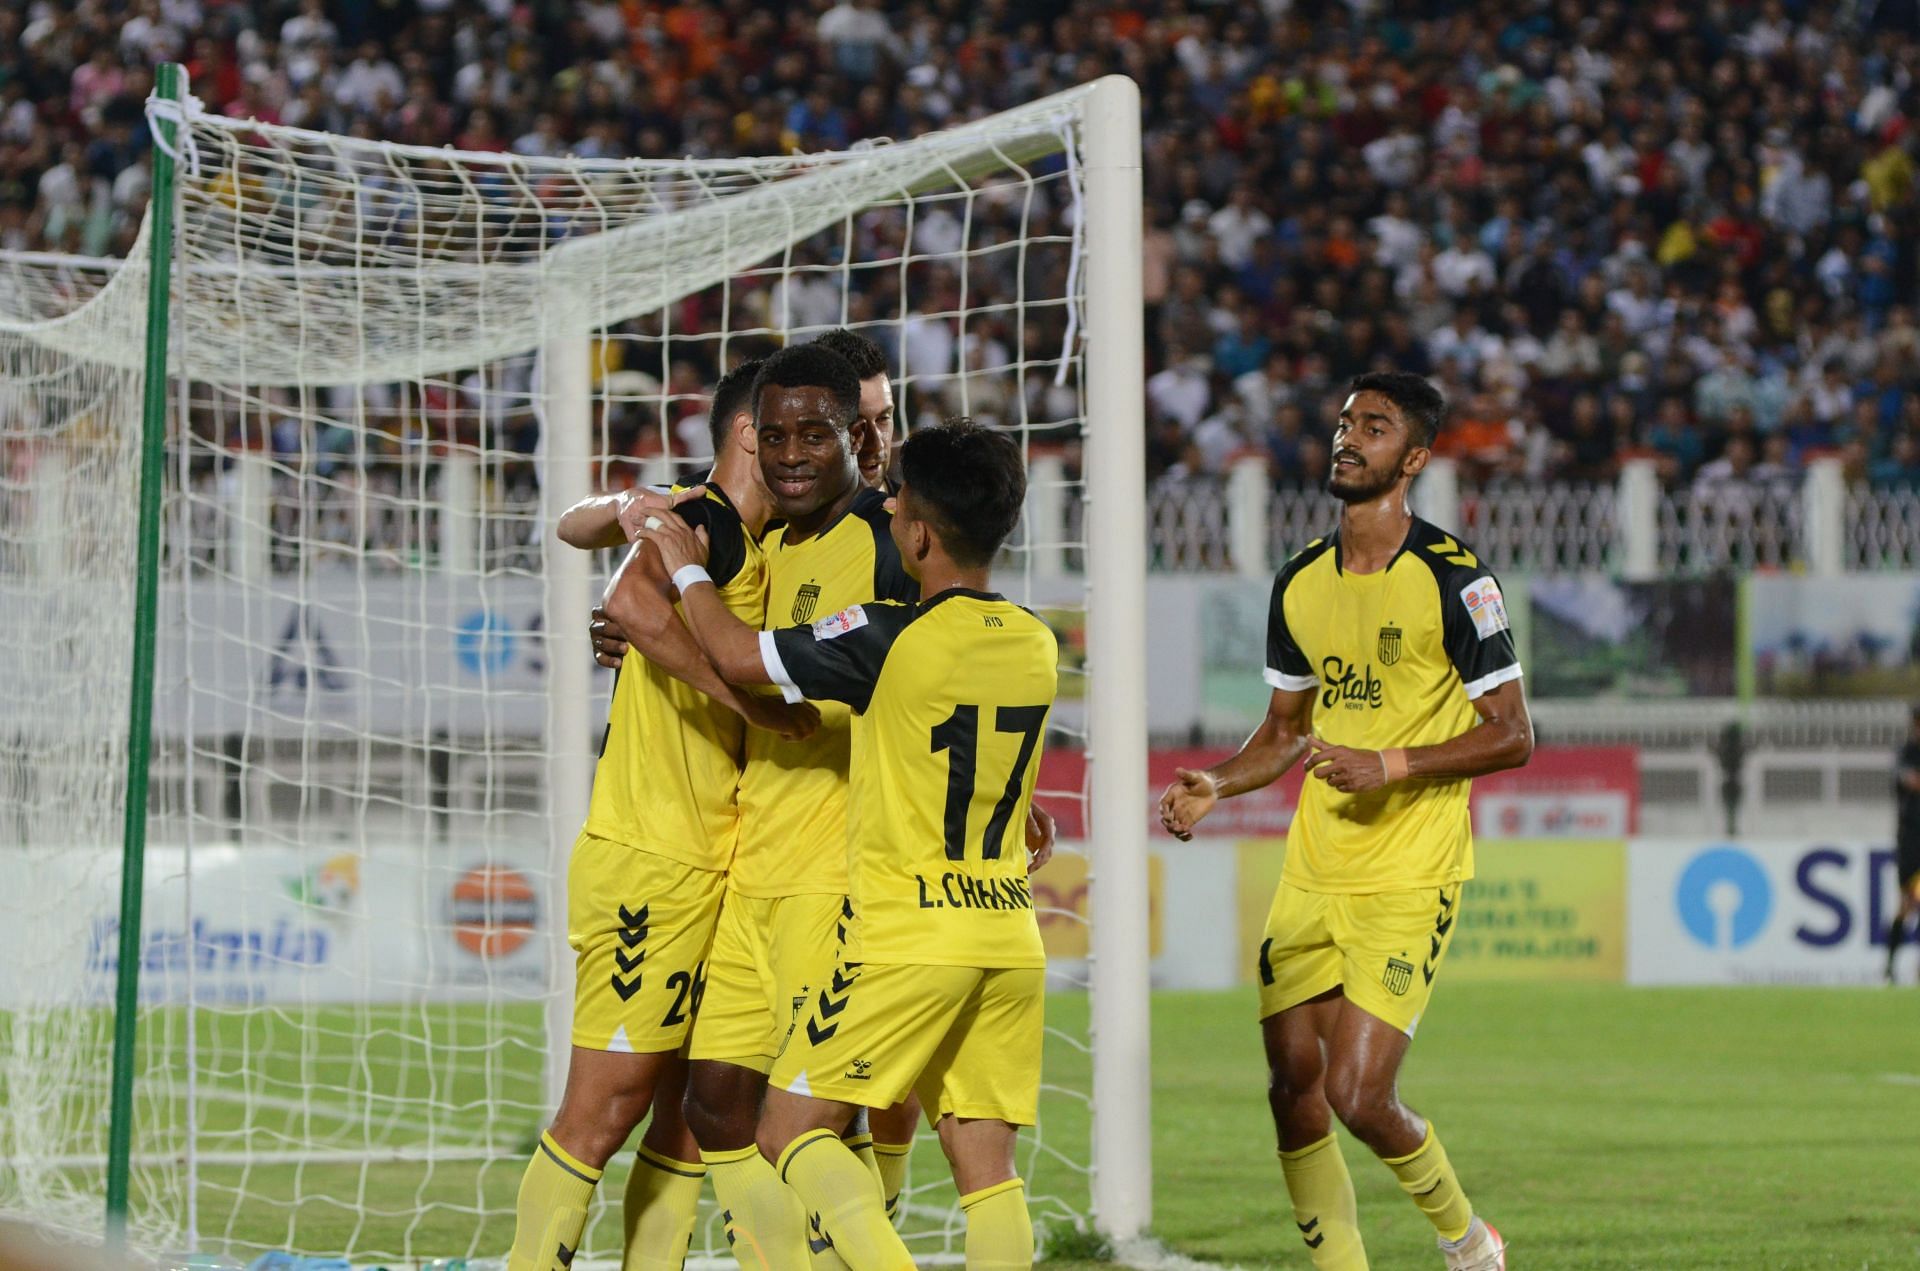 Hyderabad FC players celebrating their goal against Neroca FC.